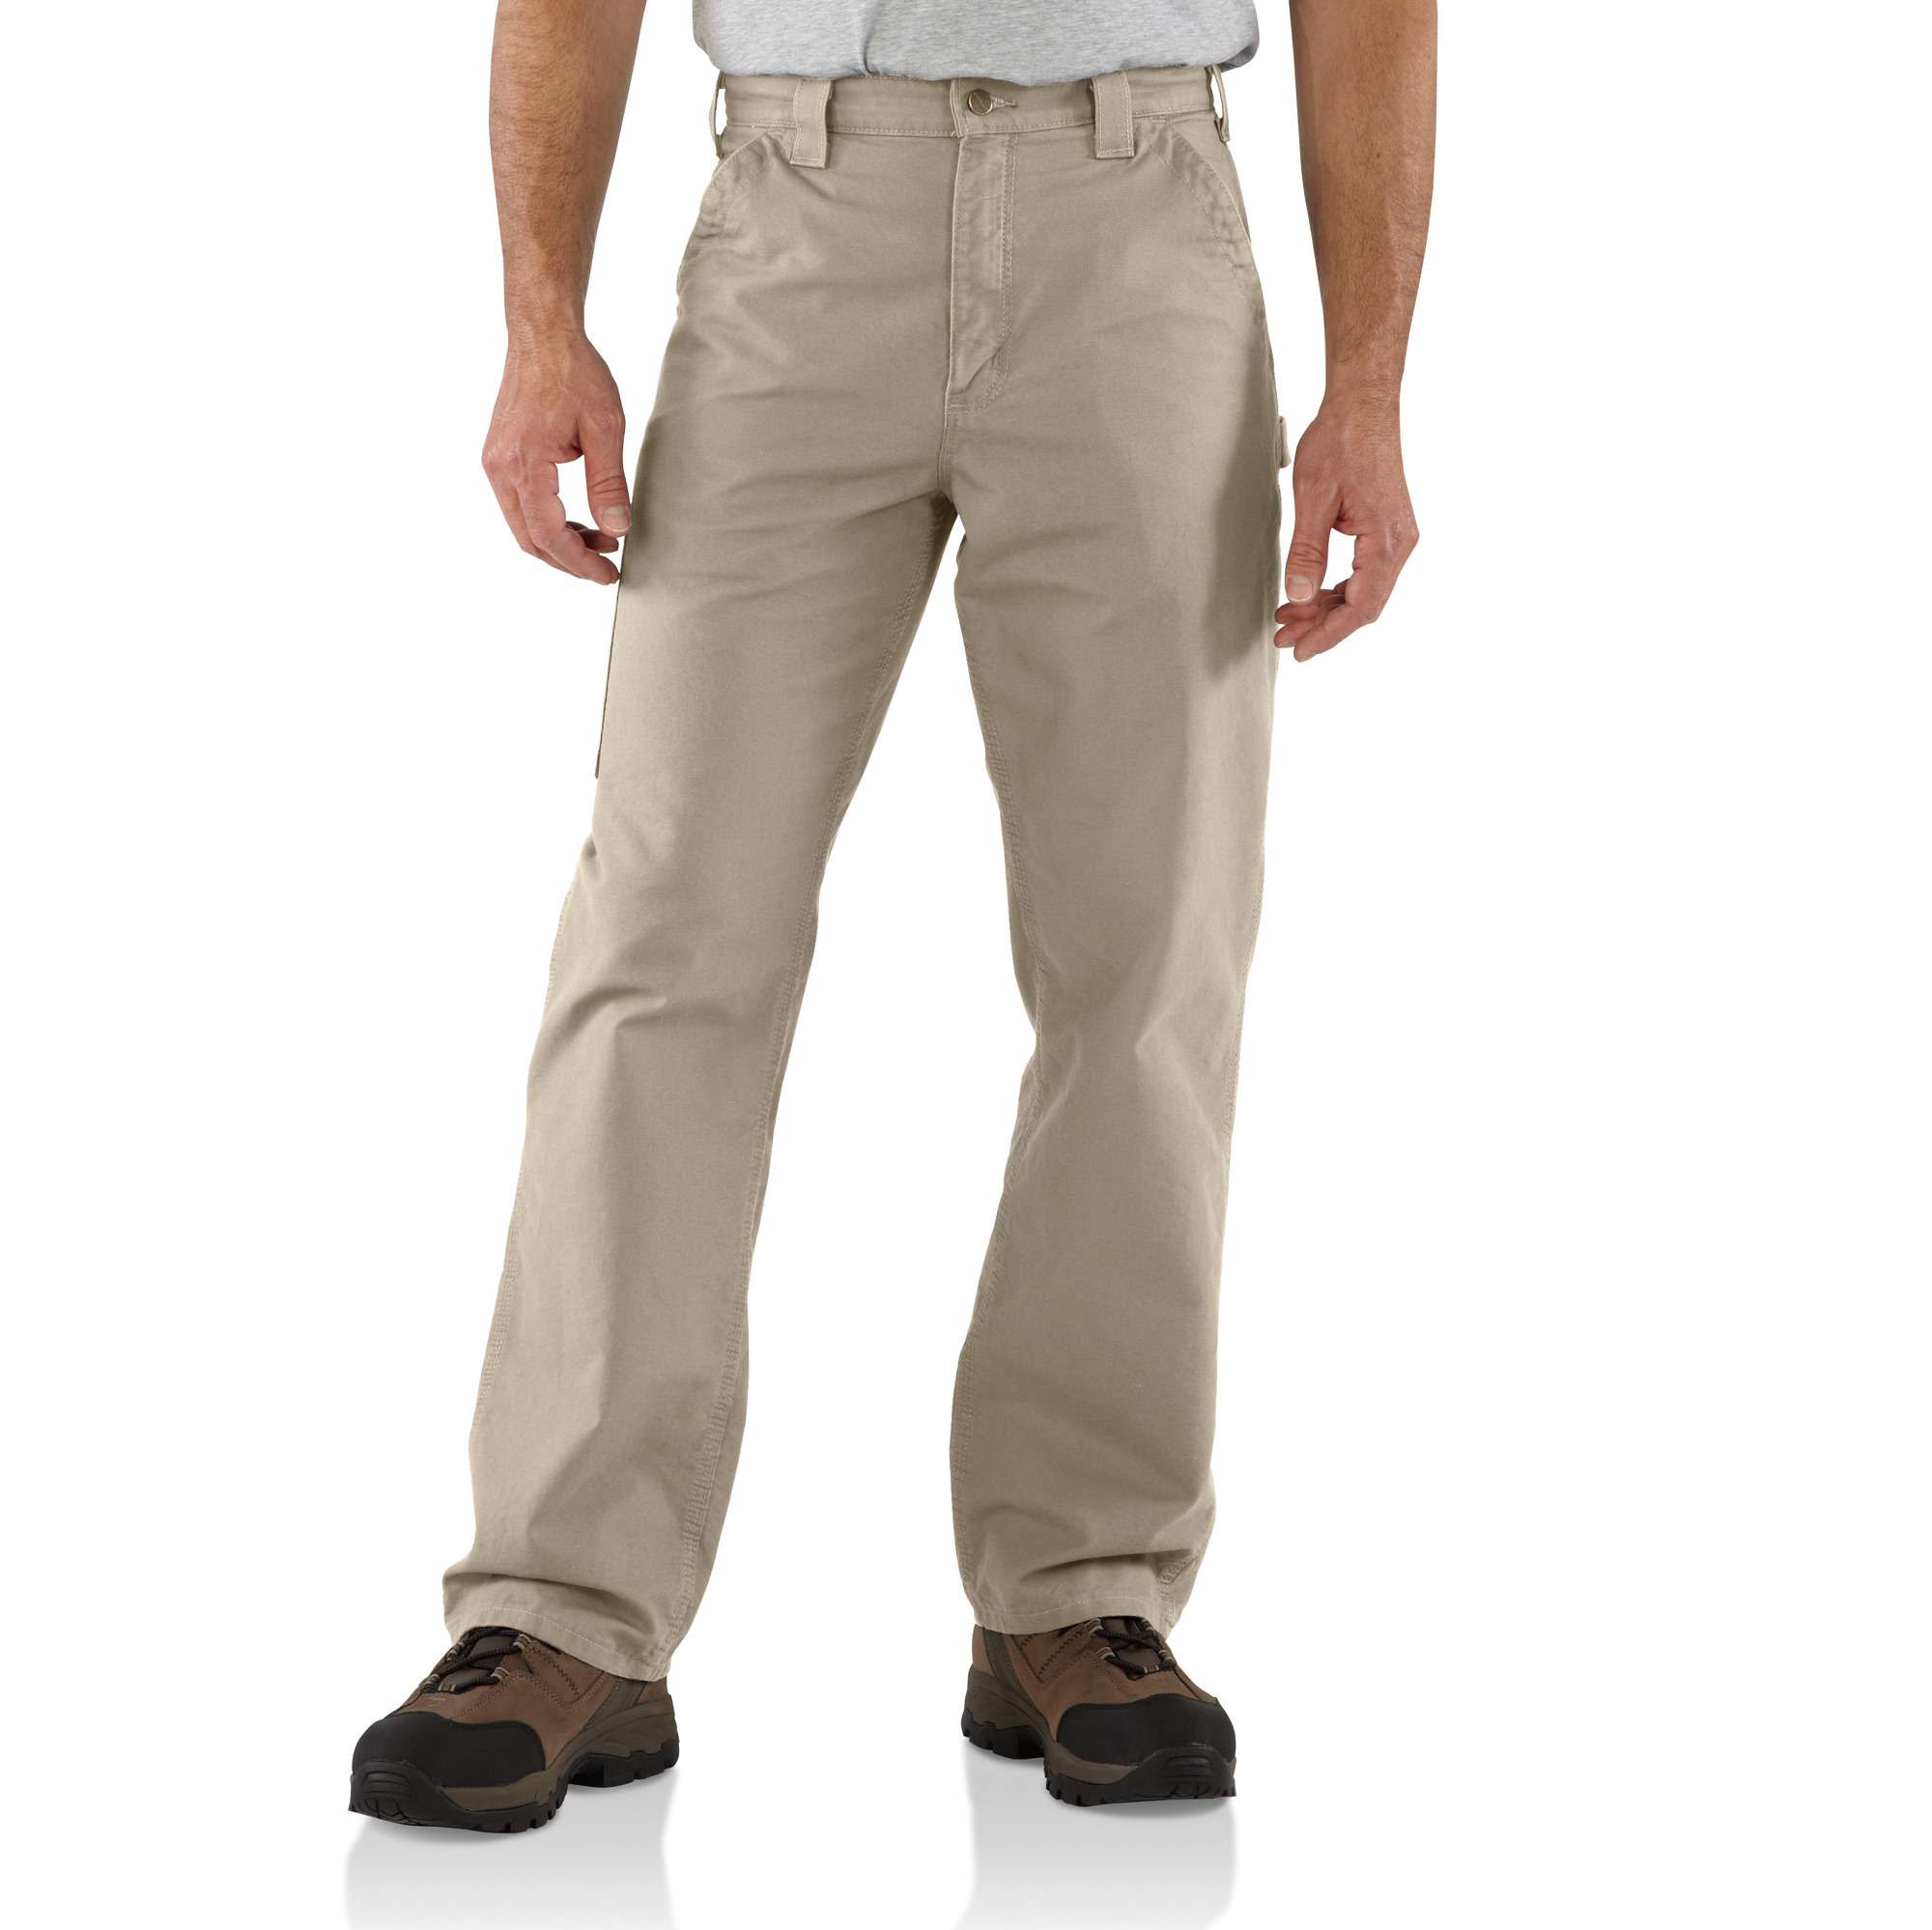 Loose Fit Canvas Utility Work Pant | Carhartt Reworked